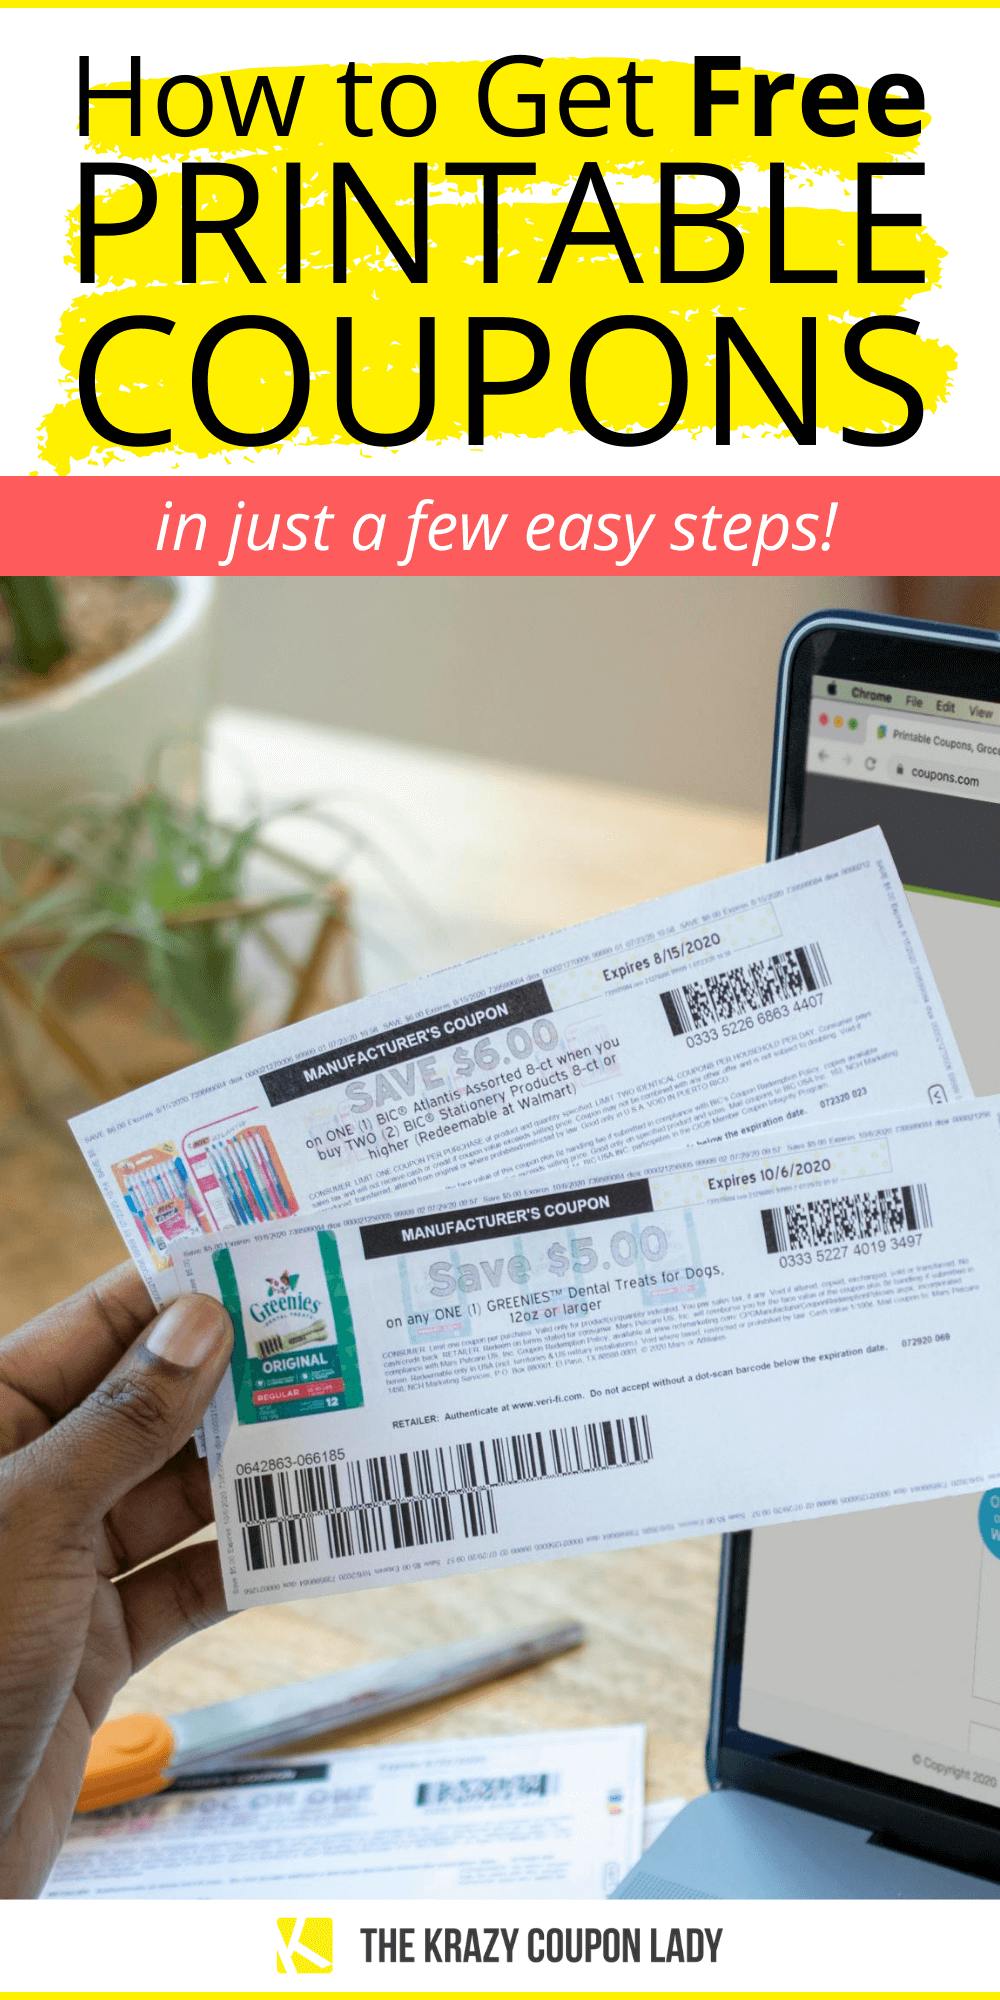 get-free-printable-coupons-in-a-few-easy-steps-the-krazy-coupon-lady